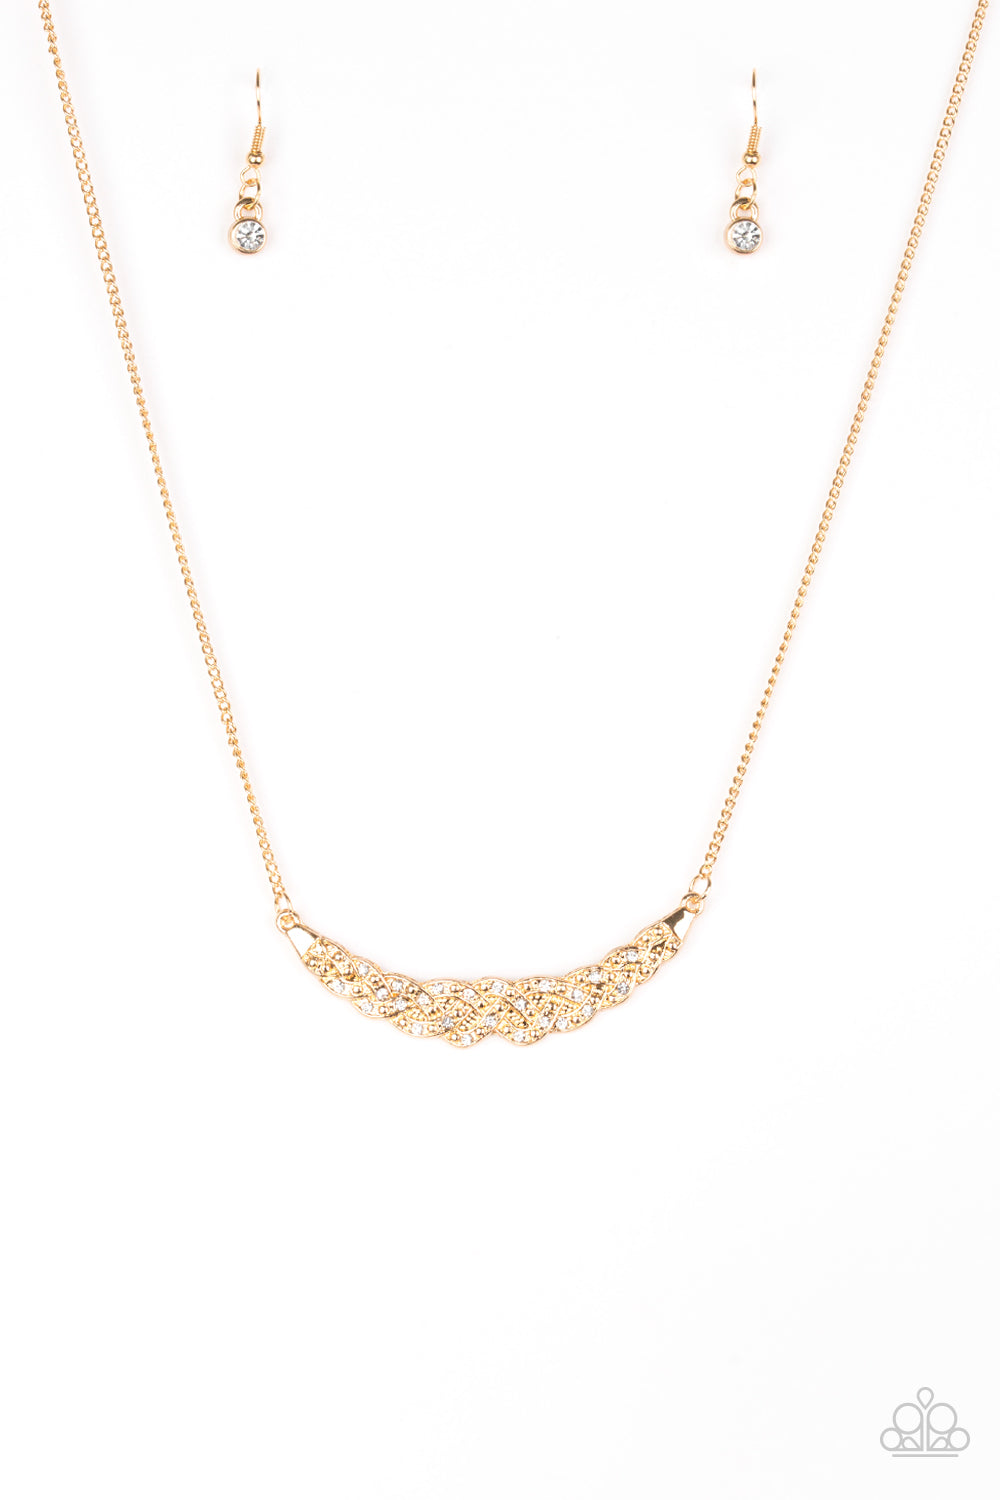 WHATEVER FLOATS YOUR YACHT - GOLD NECKLACE